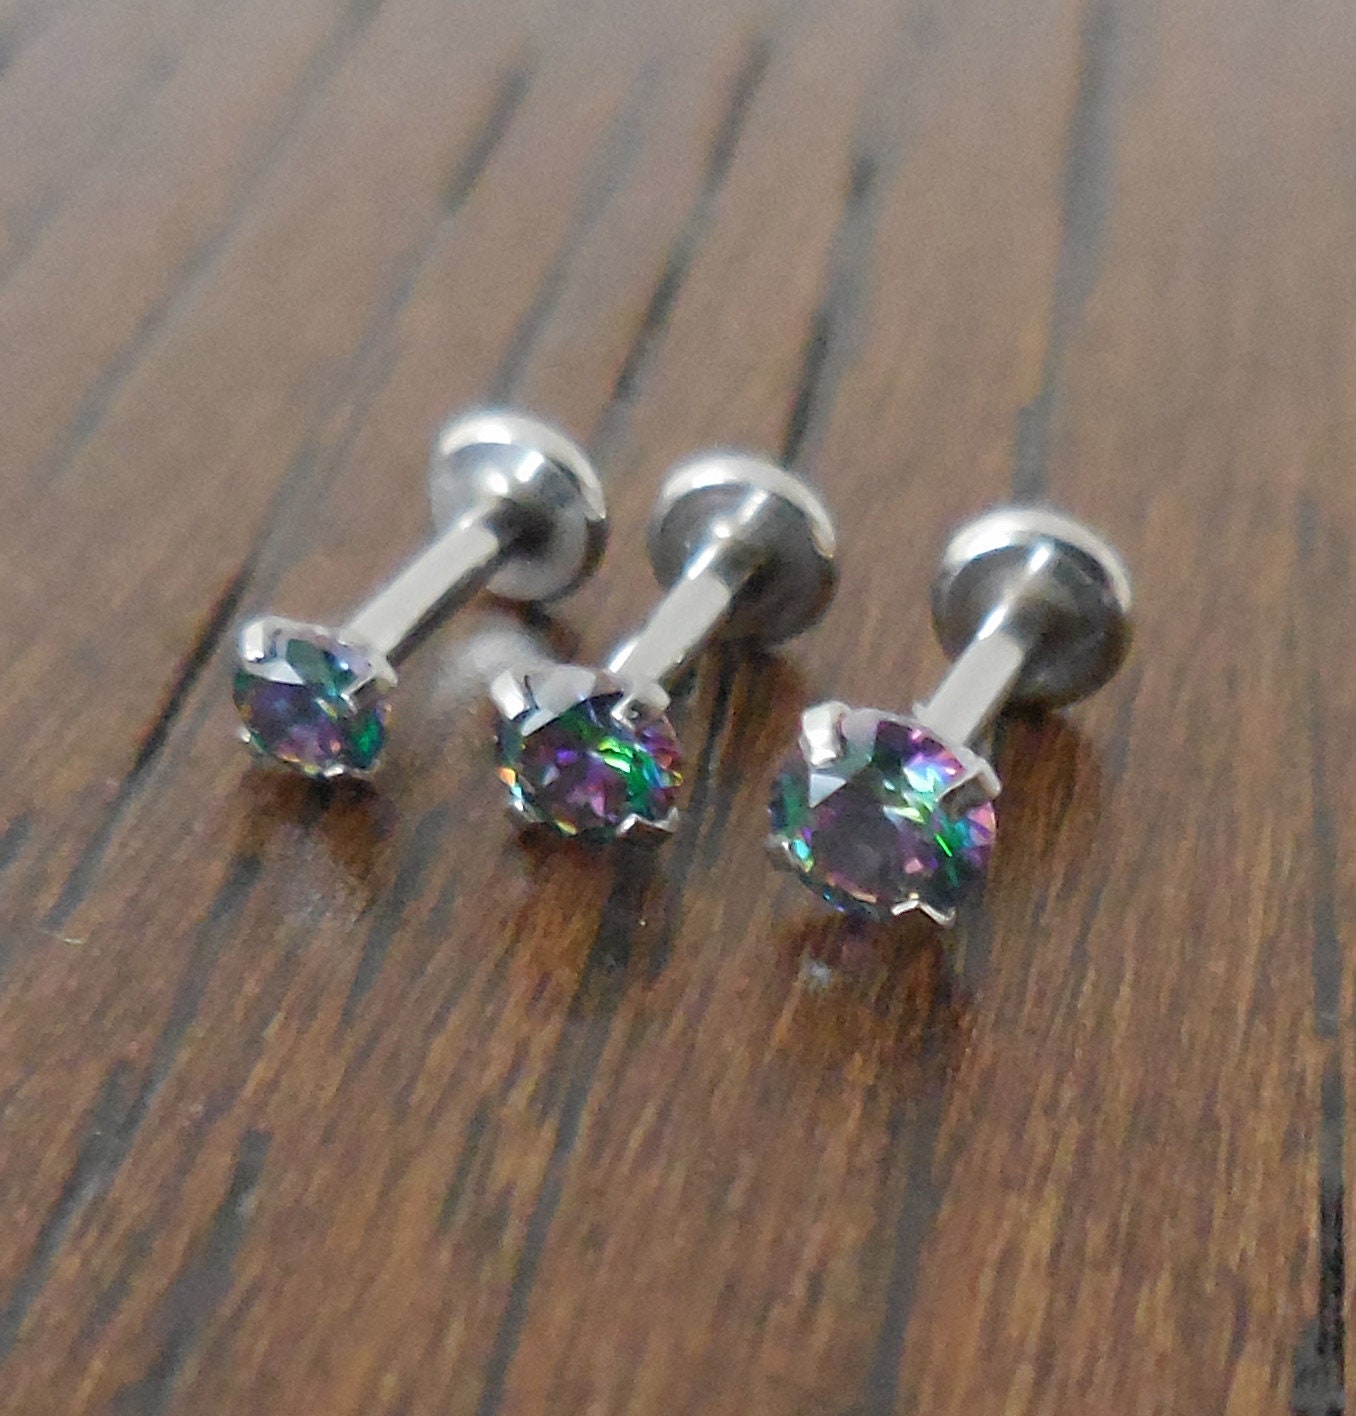 16g 2-4mm Tragus 6mm-8mm Threadless Push Pin Labret Triple Forward Helix Rainbow CZ Stone Ring Cartilage Earrings Stainless Prong Set